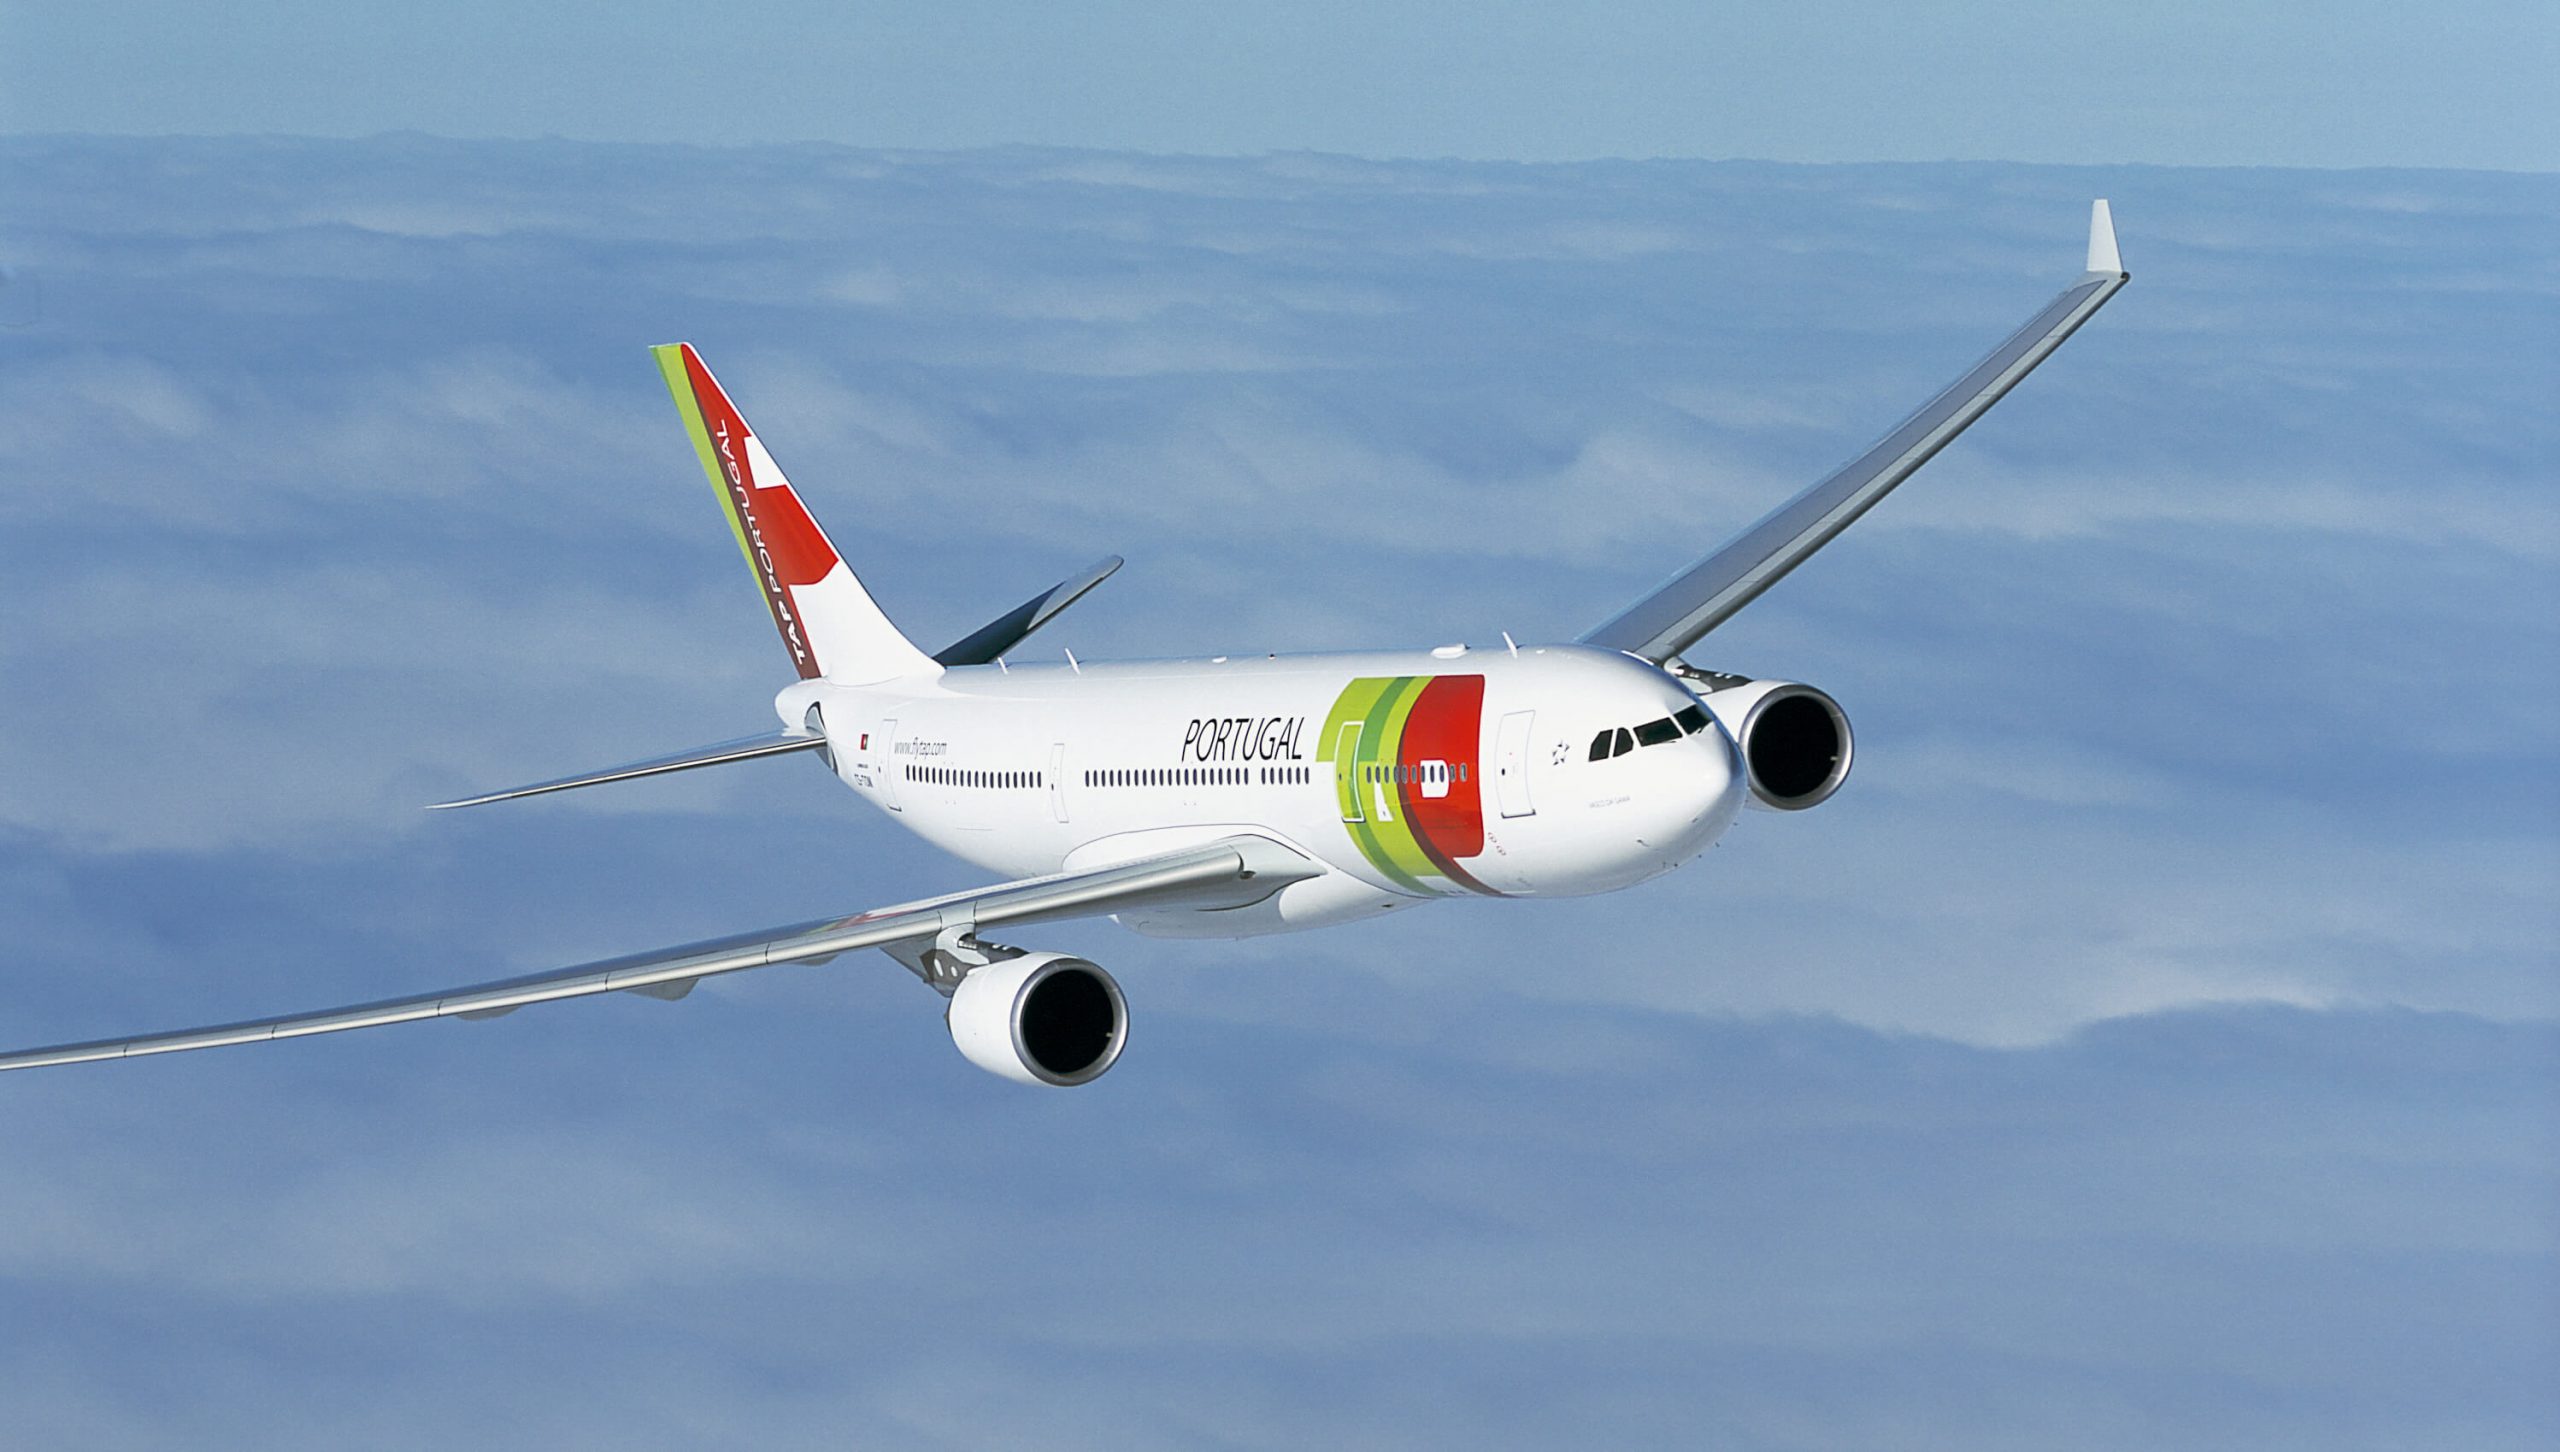 Portugal’s flag carrier to tap transatlantic markets with more flights